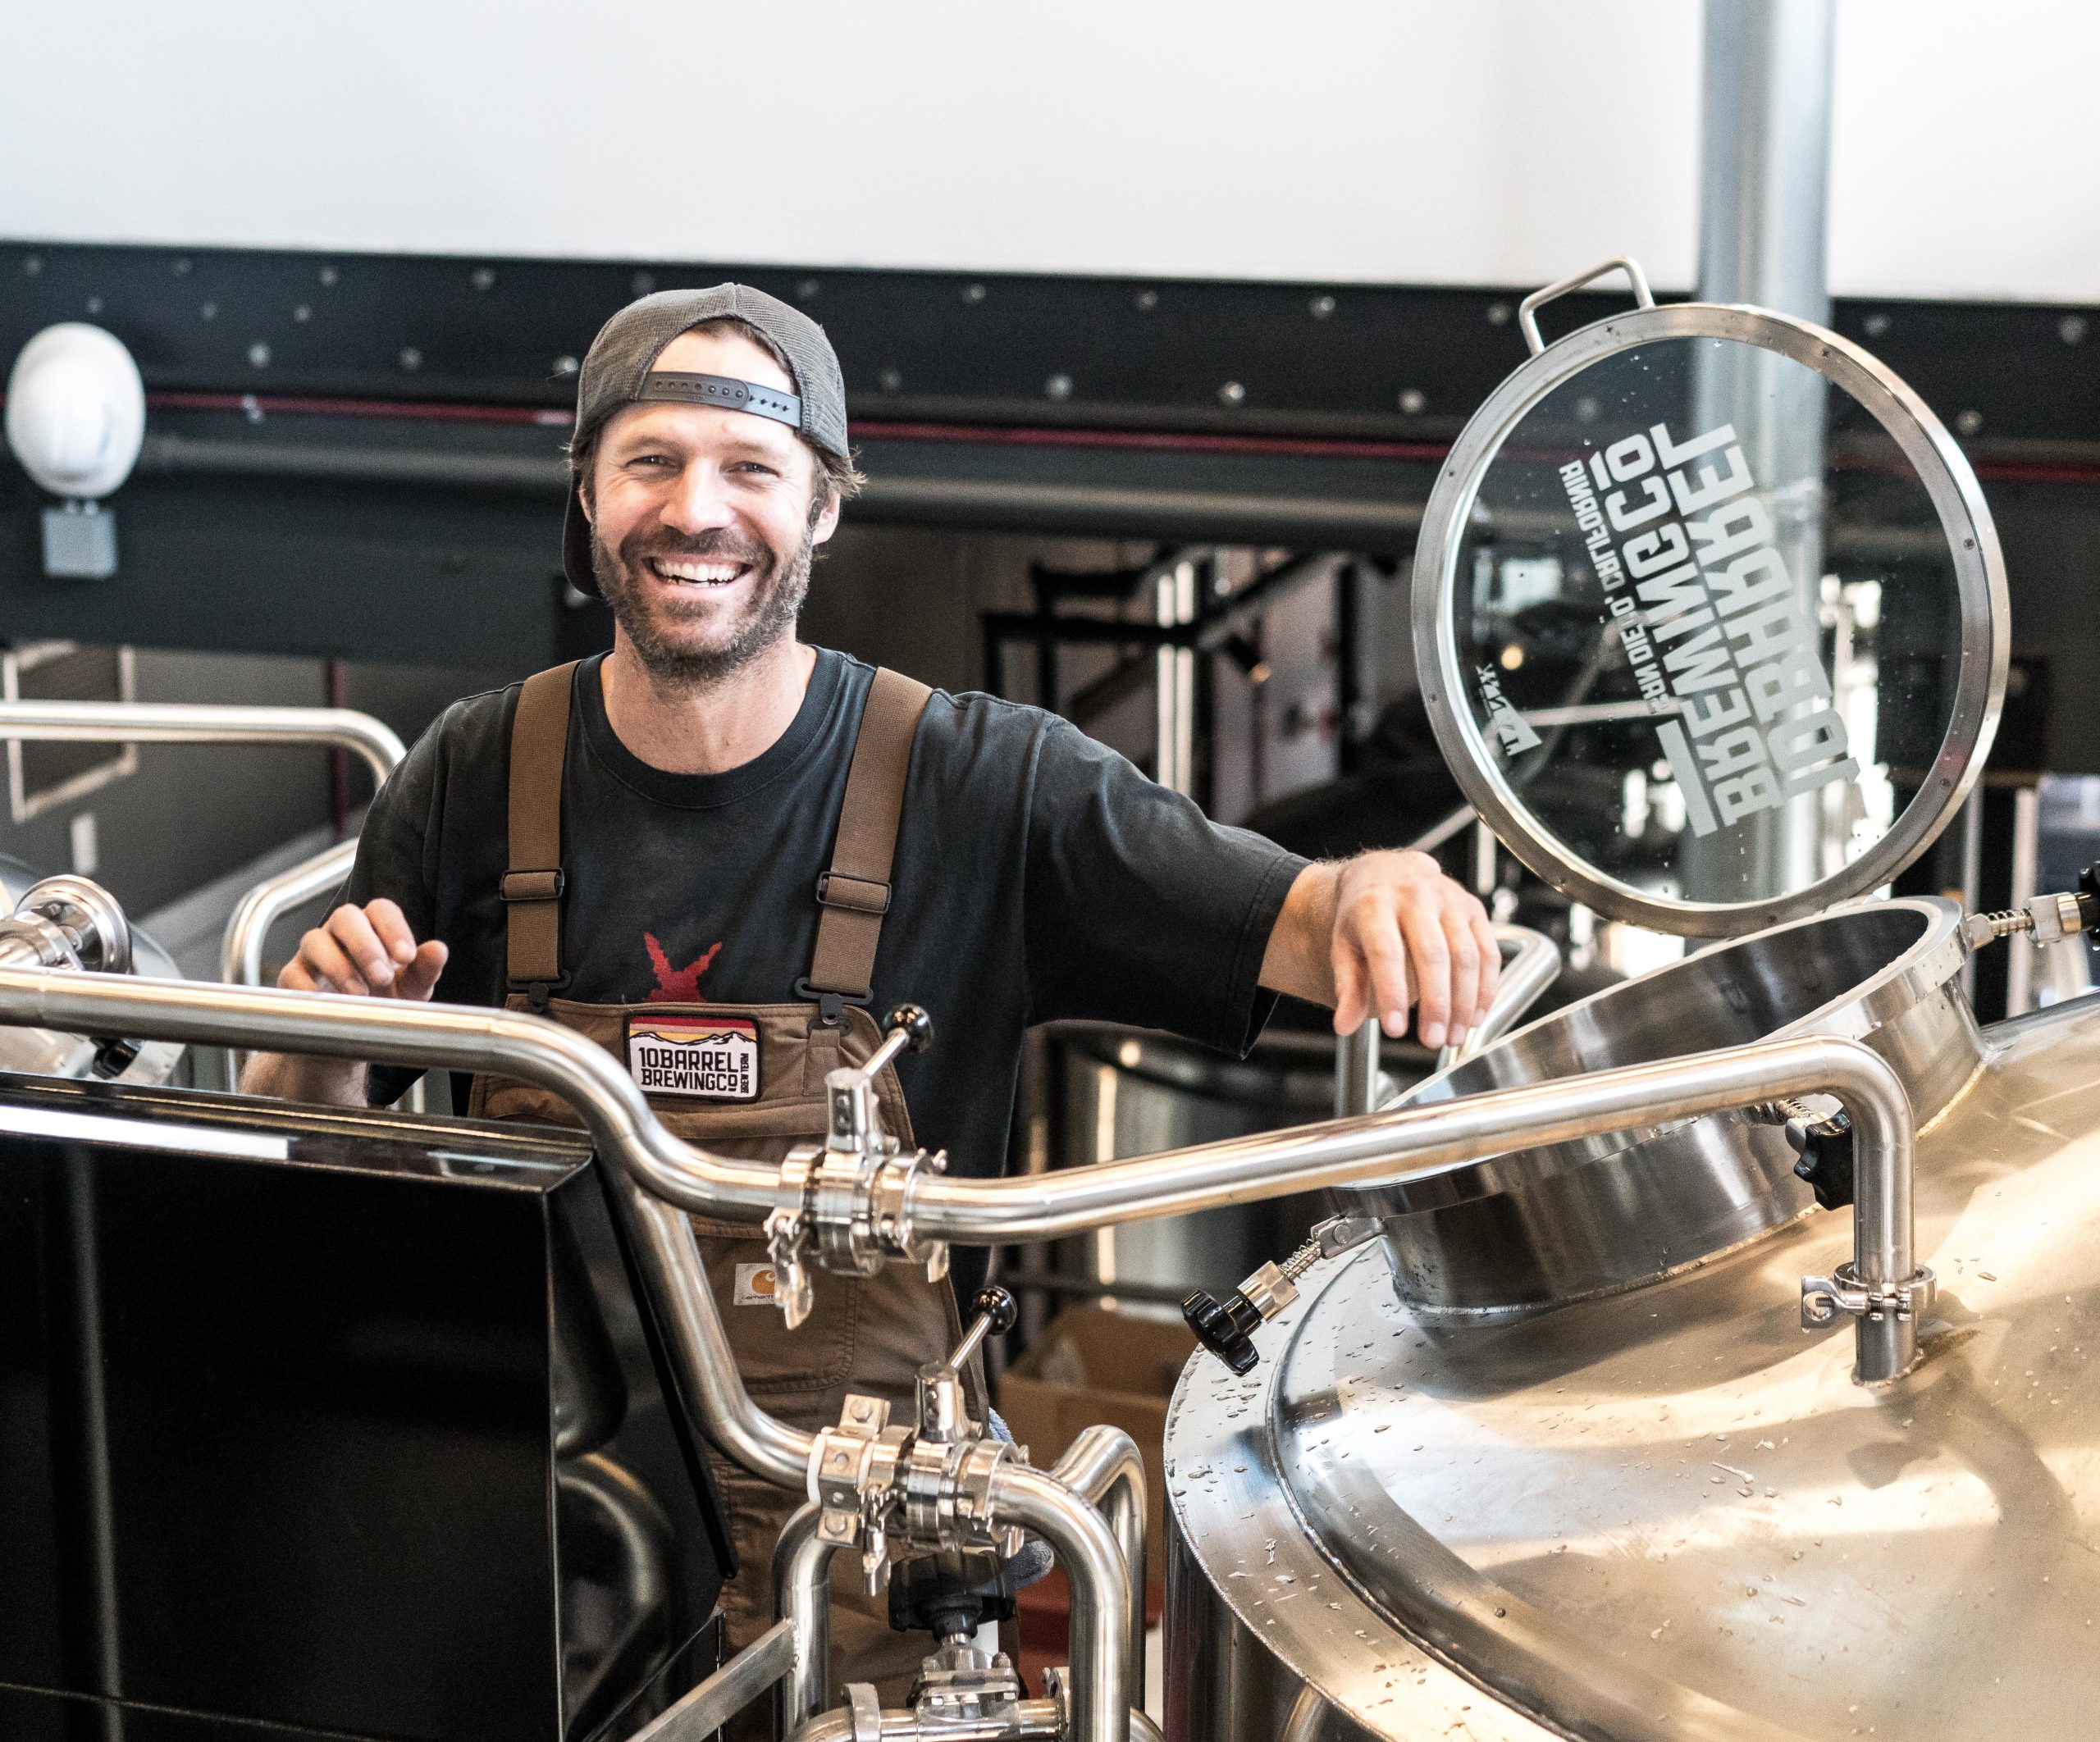 smiling business owner with his brewing equipment on the foreground